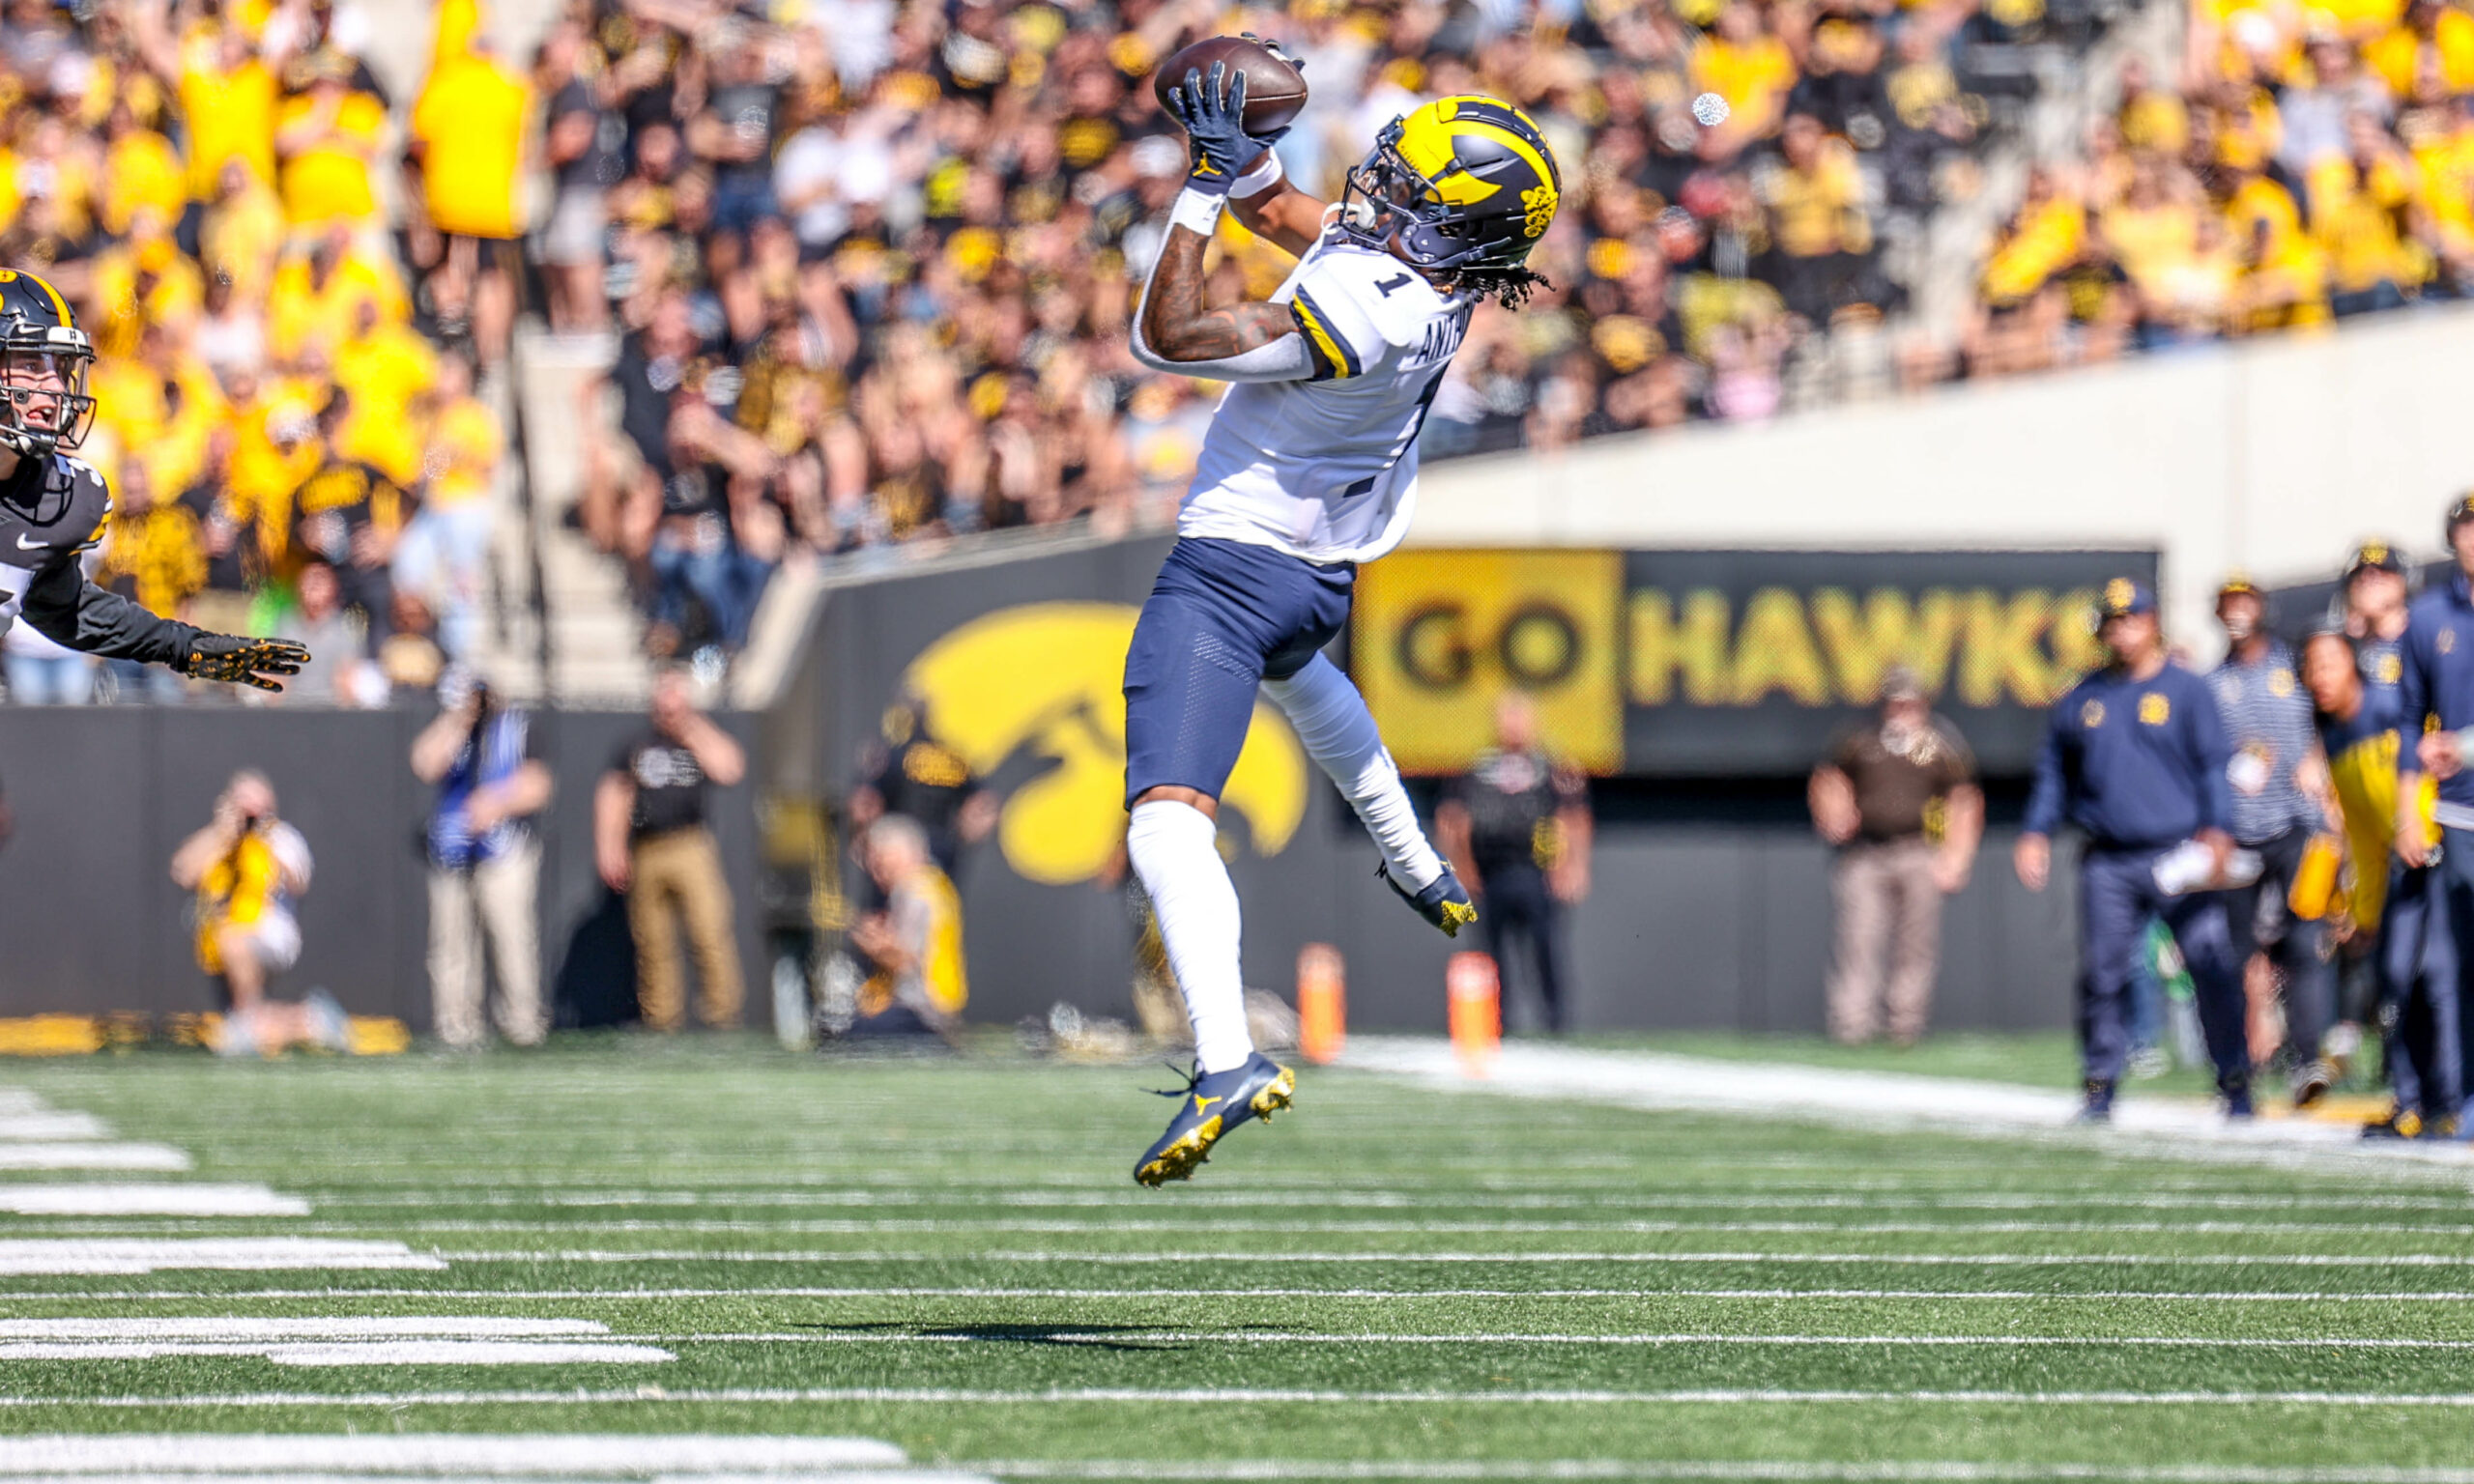 Things you may not have known about Michigan football’s win over Iowa